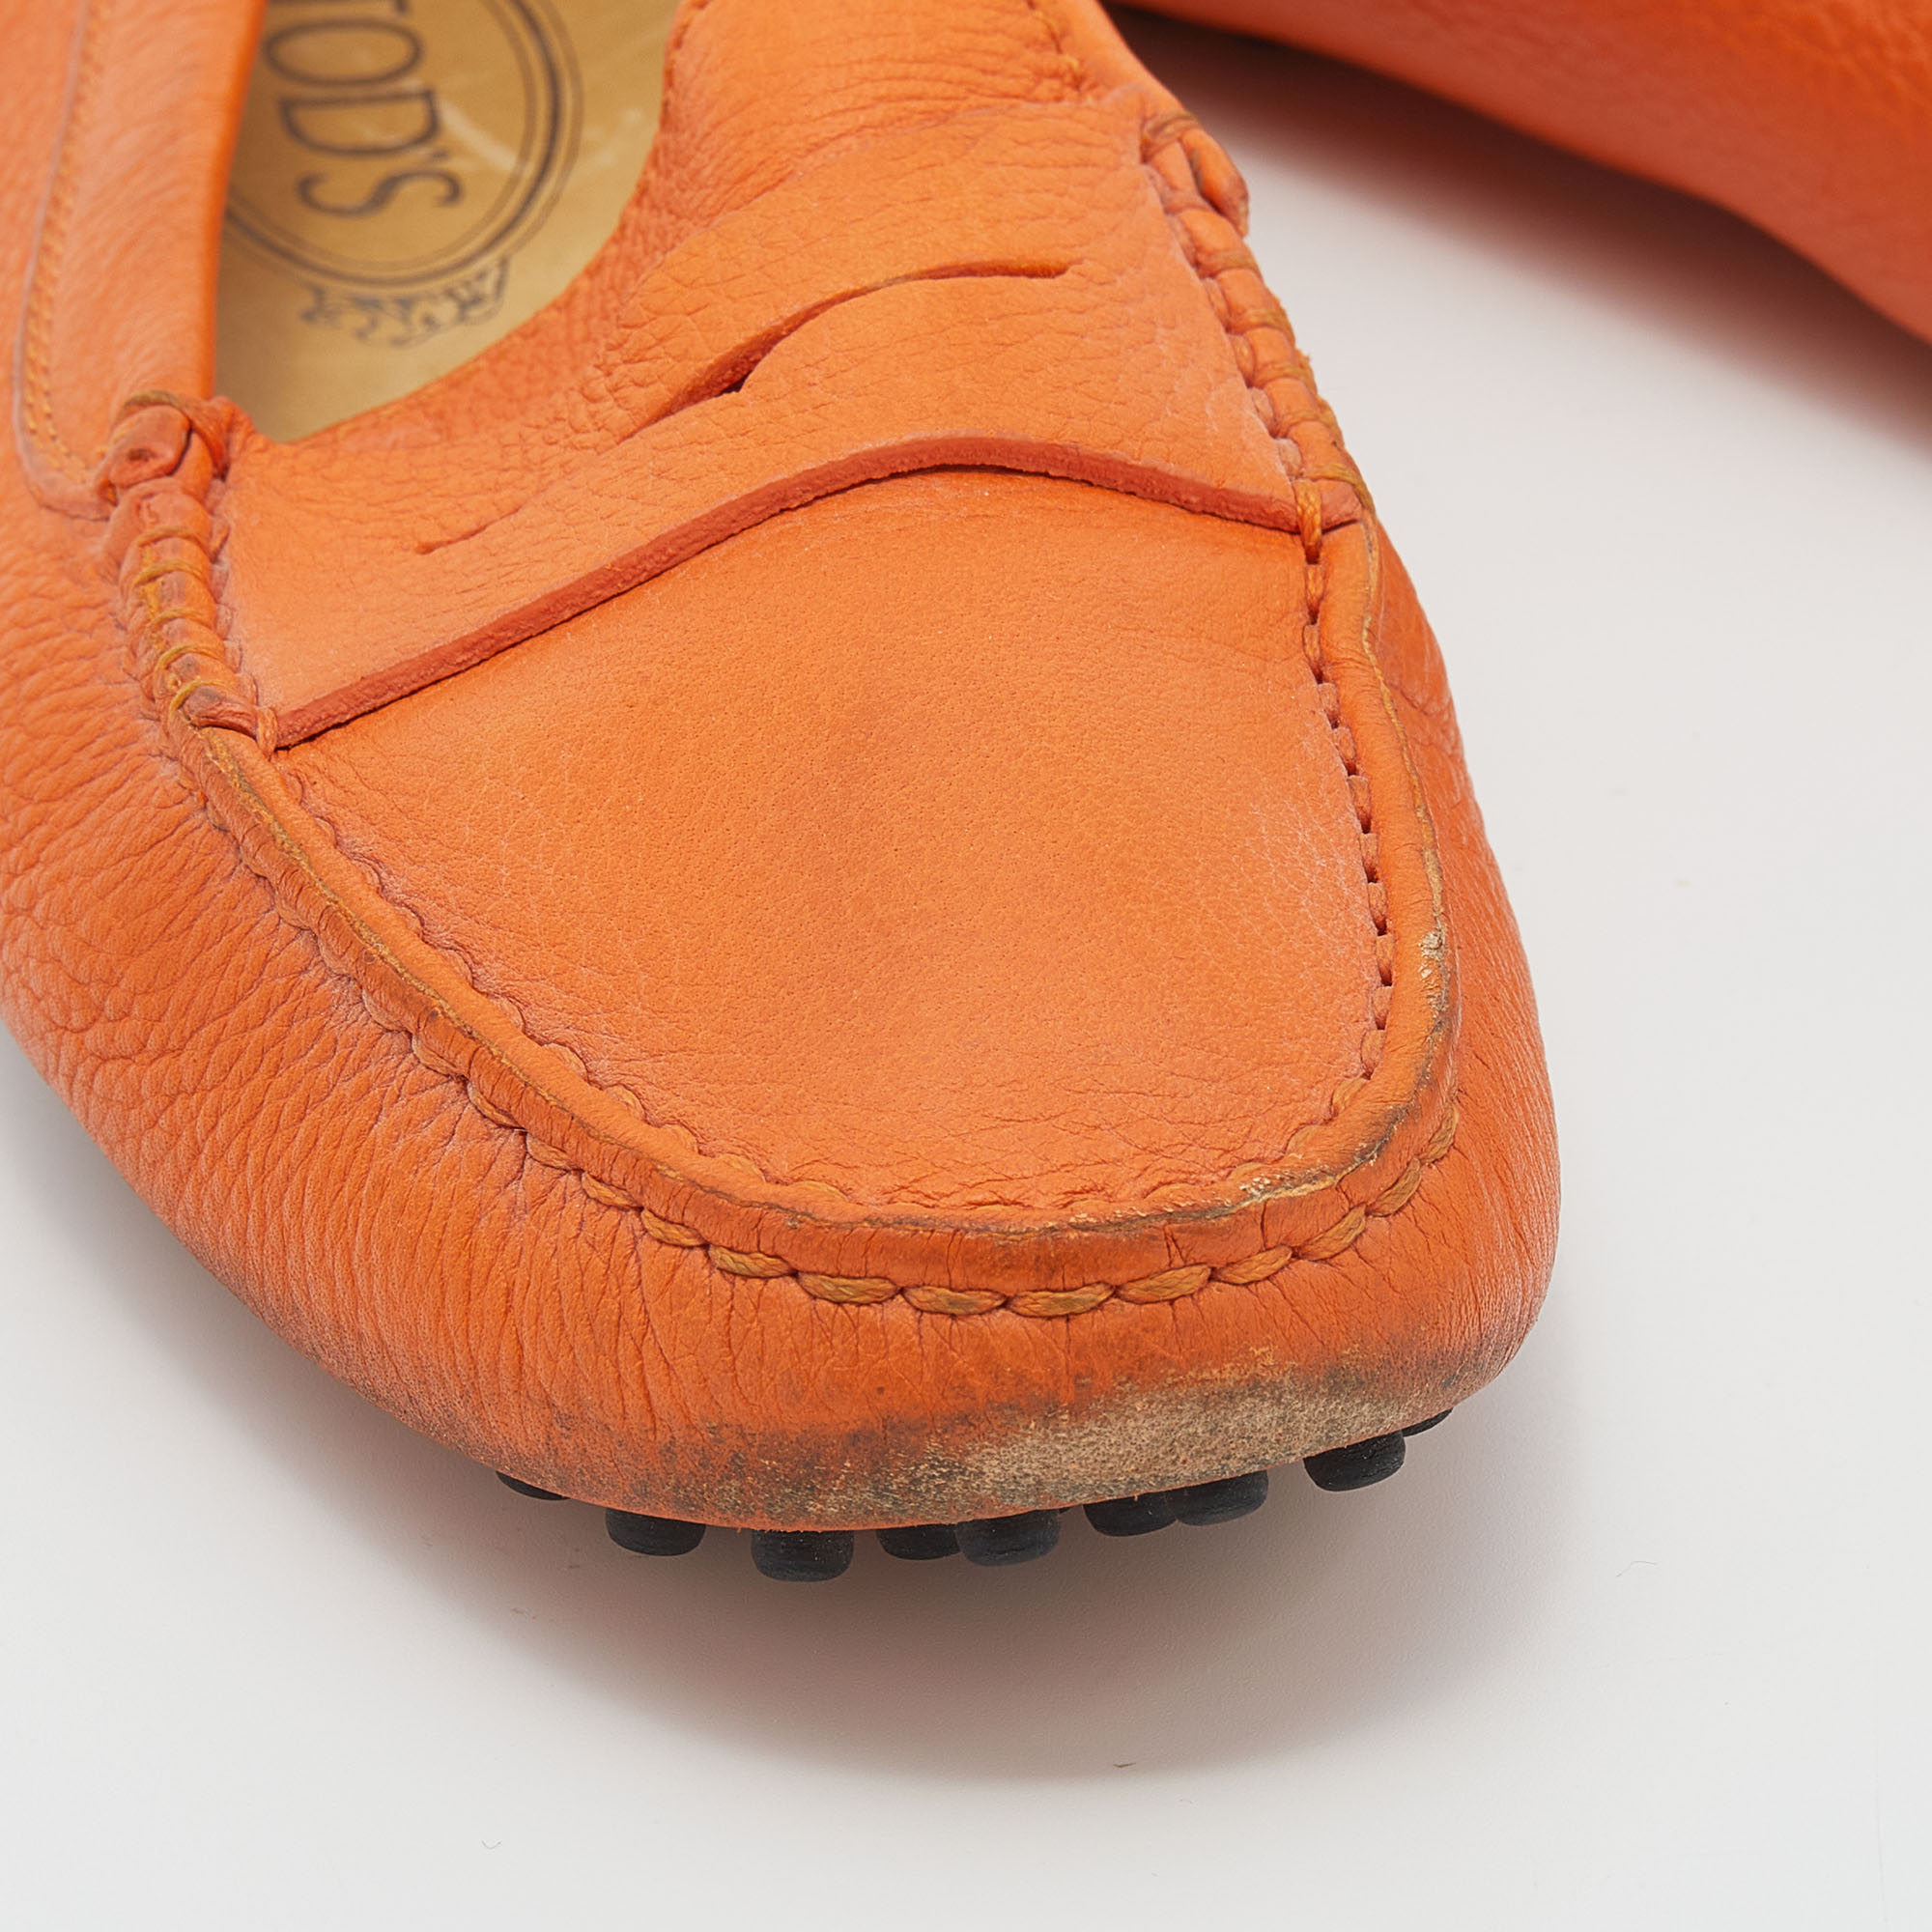 Tod's Orange Leather Penny Slip On Loafers Size 37